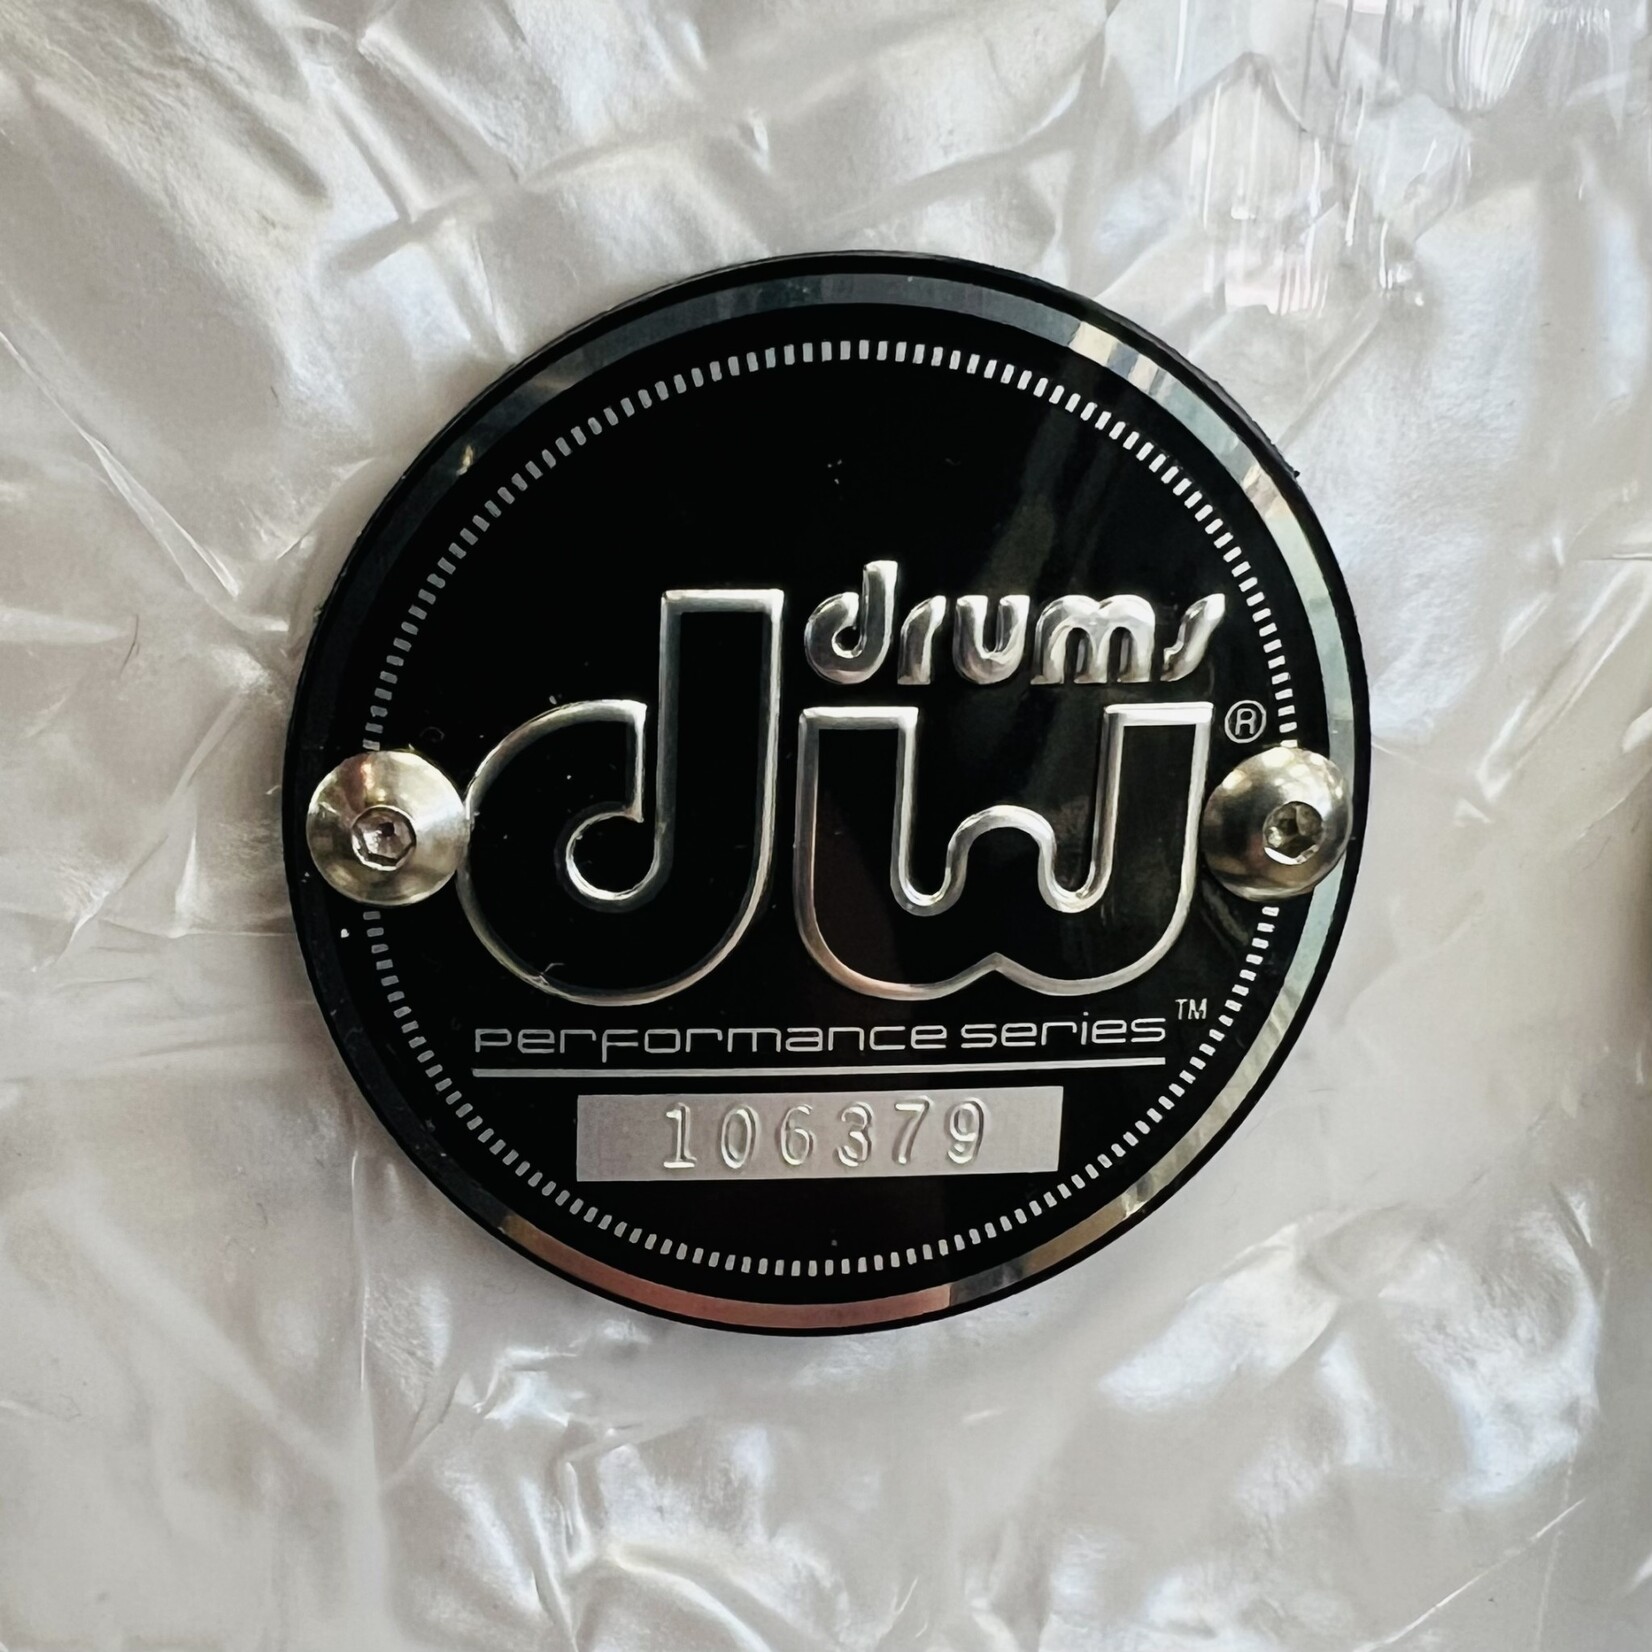 DW Used DW Performance 6.5x14 Snare Drum (White Marine)